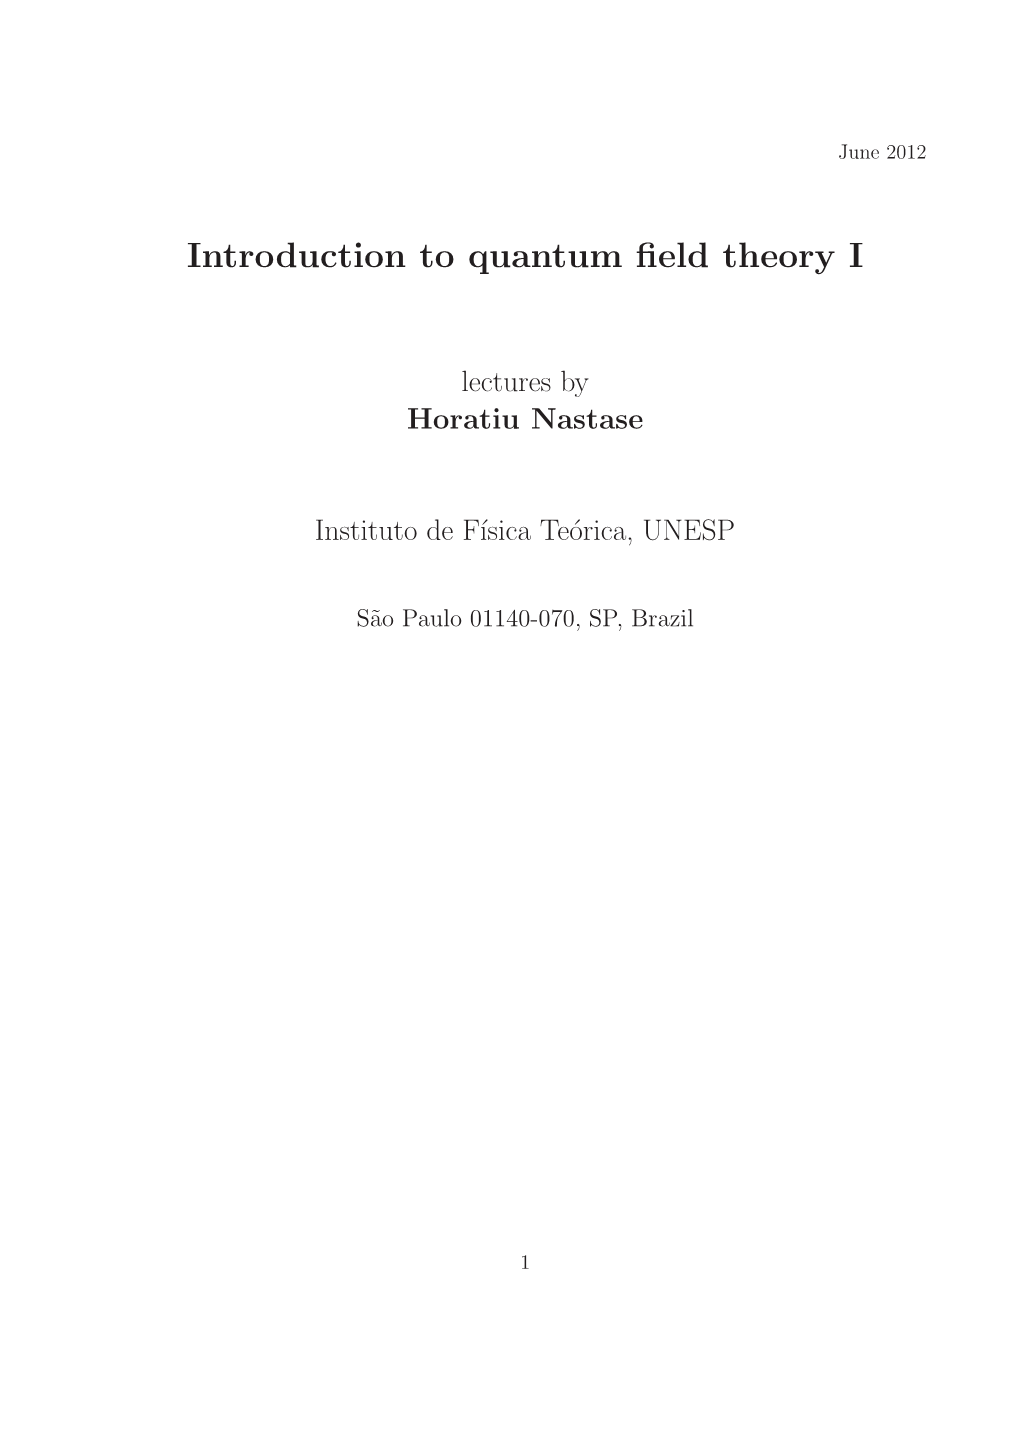 Introduction to Quantum Field Theory I